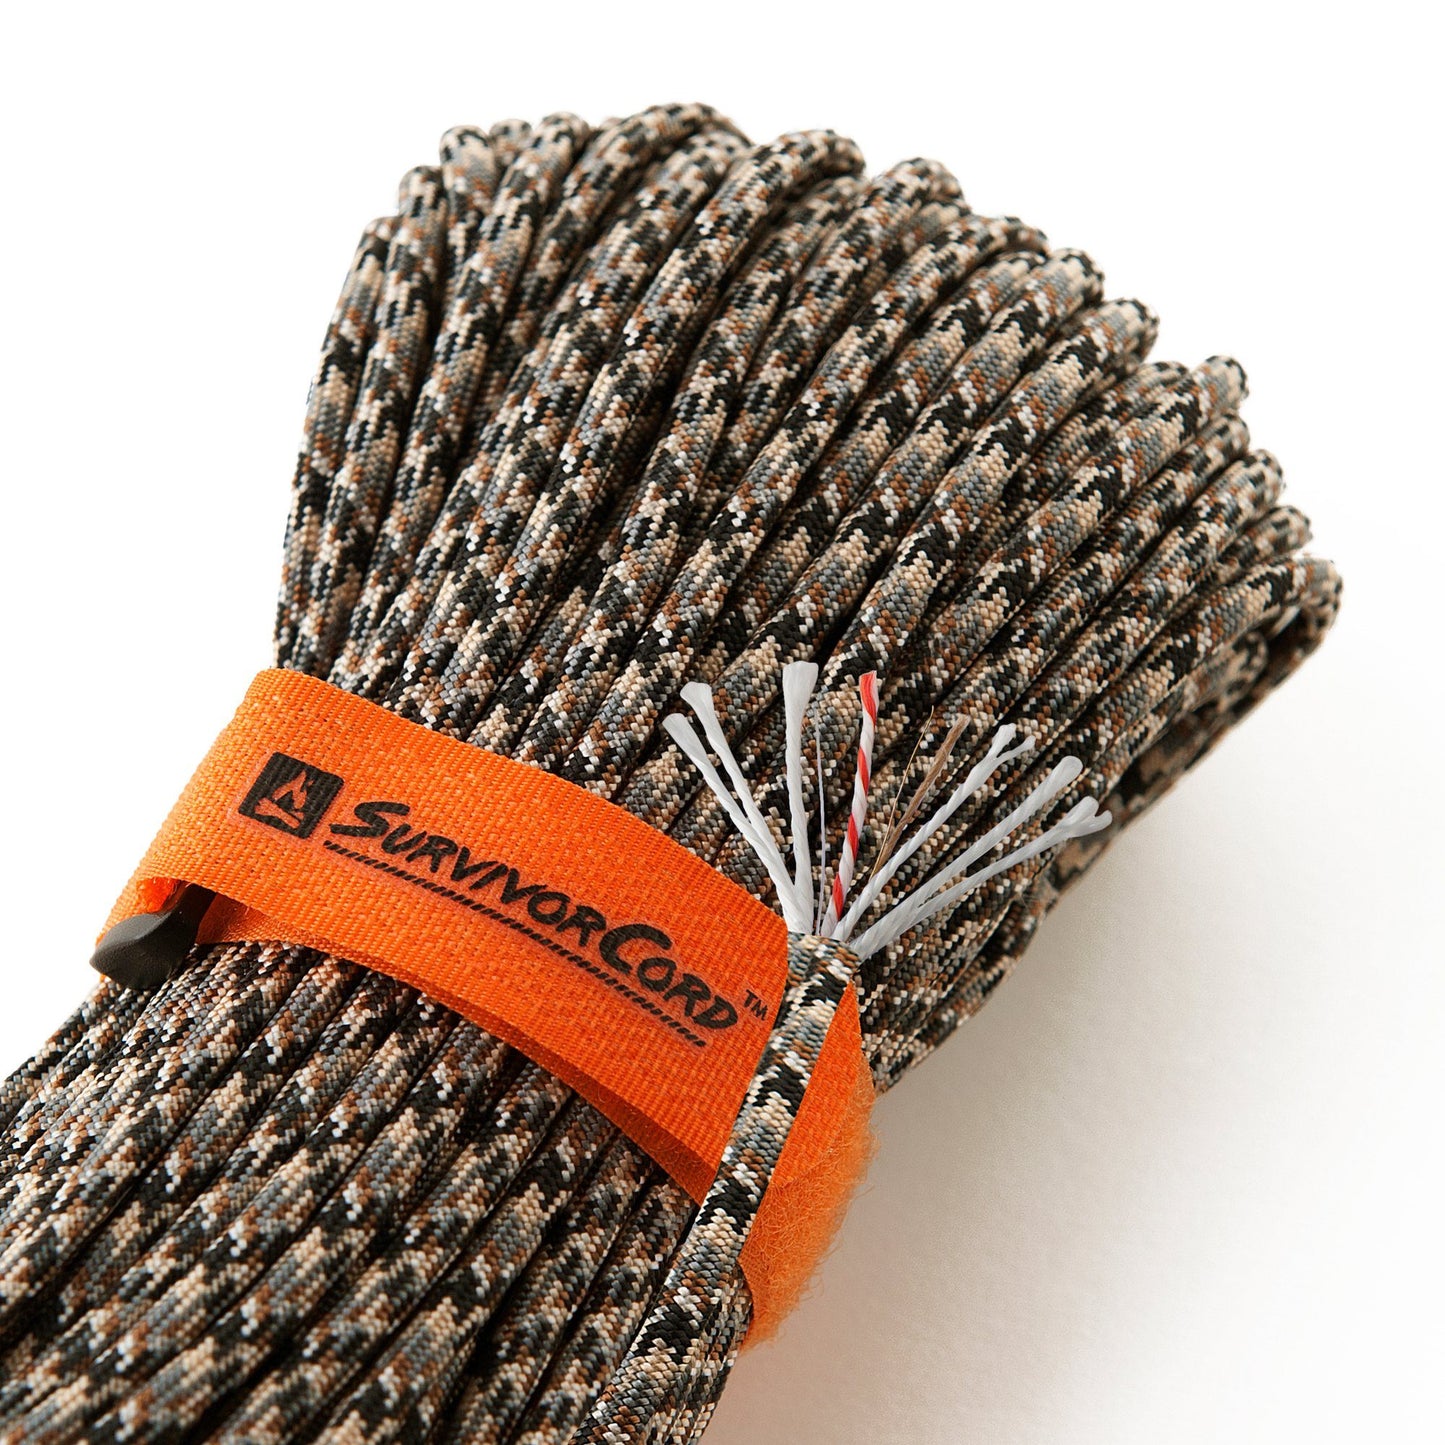 Detail of ACU snakeskin SurvivorCord with cord construction exposed and visible identification tags